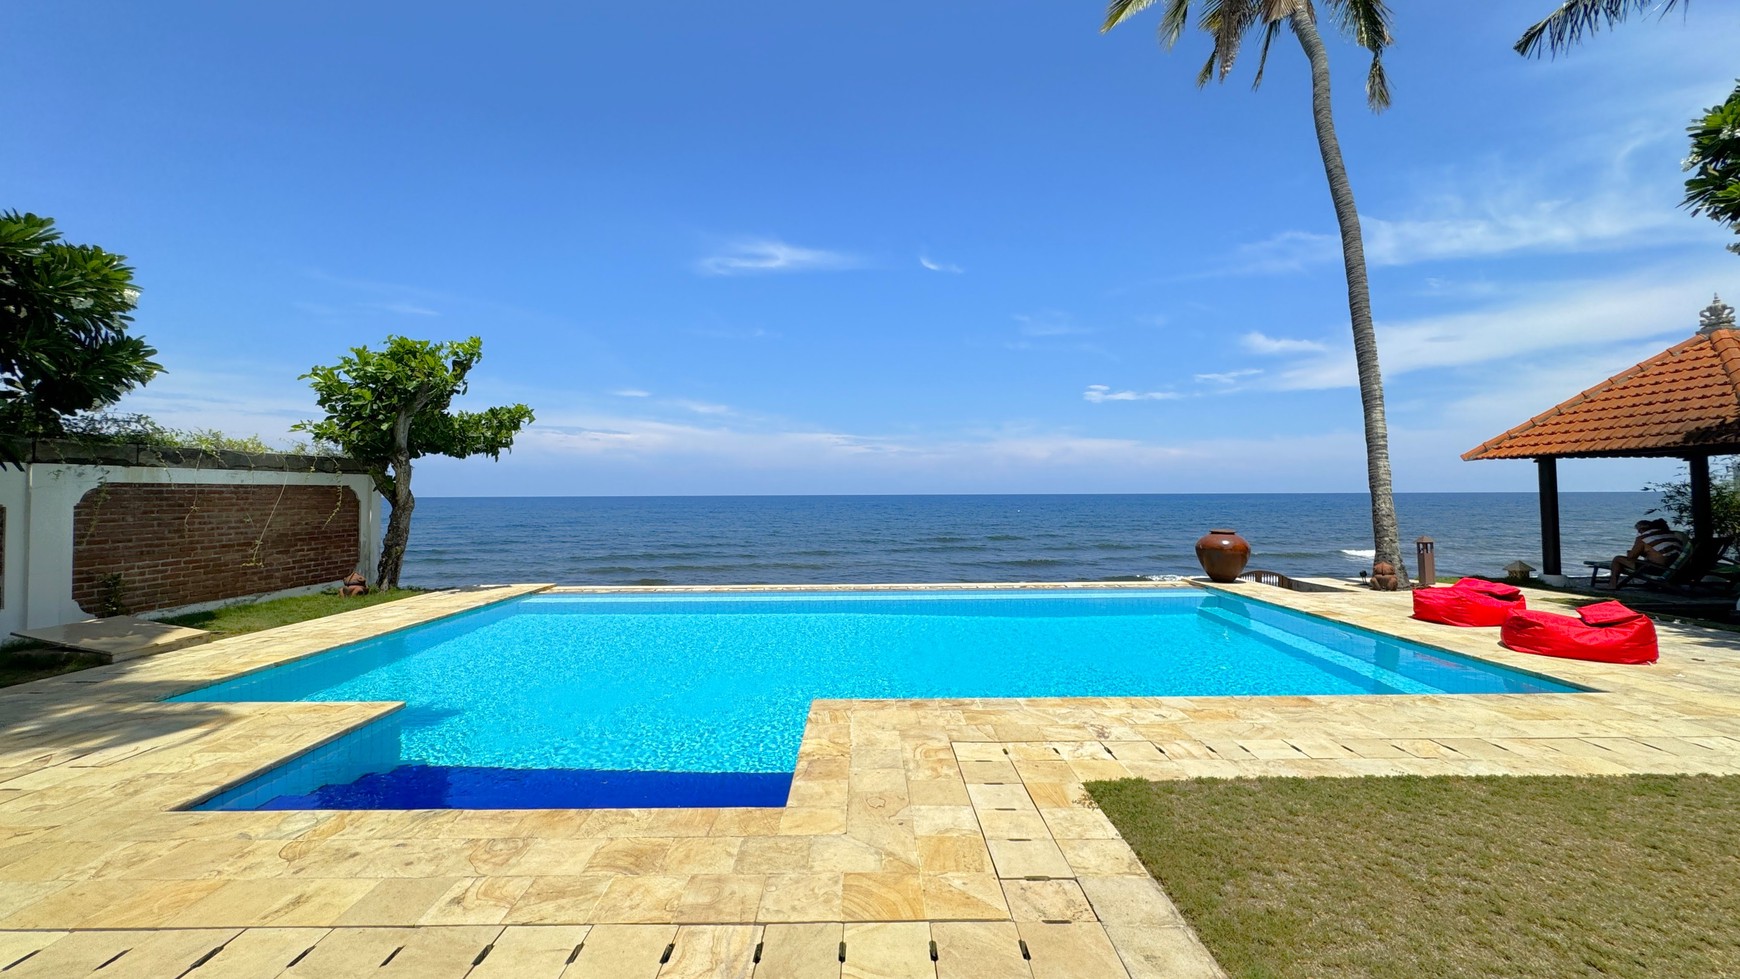 Beautiful Villa In The North East Cost Of Bali